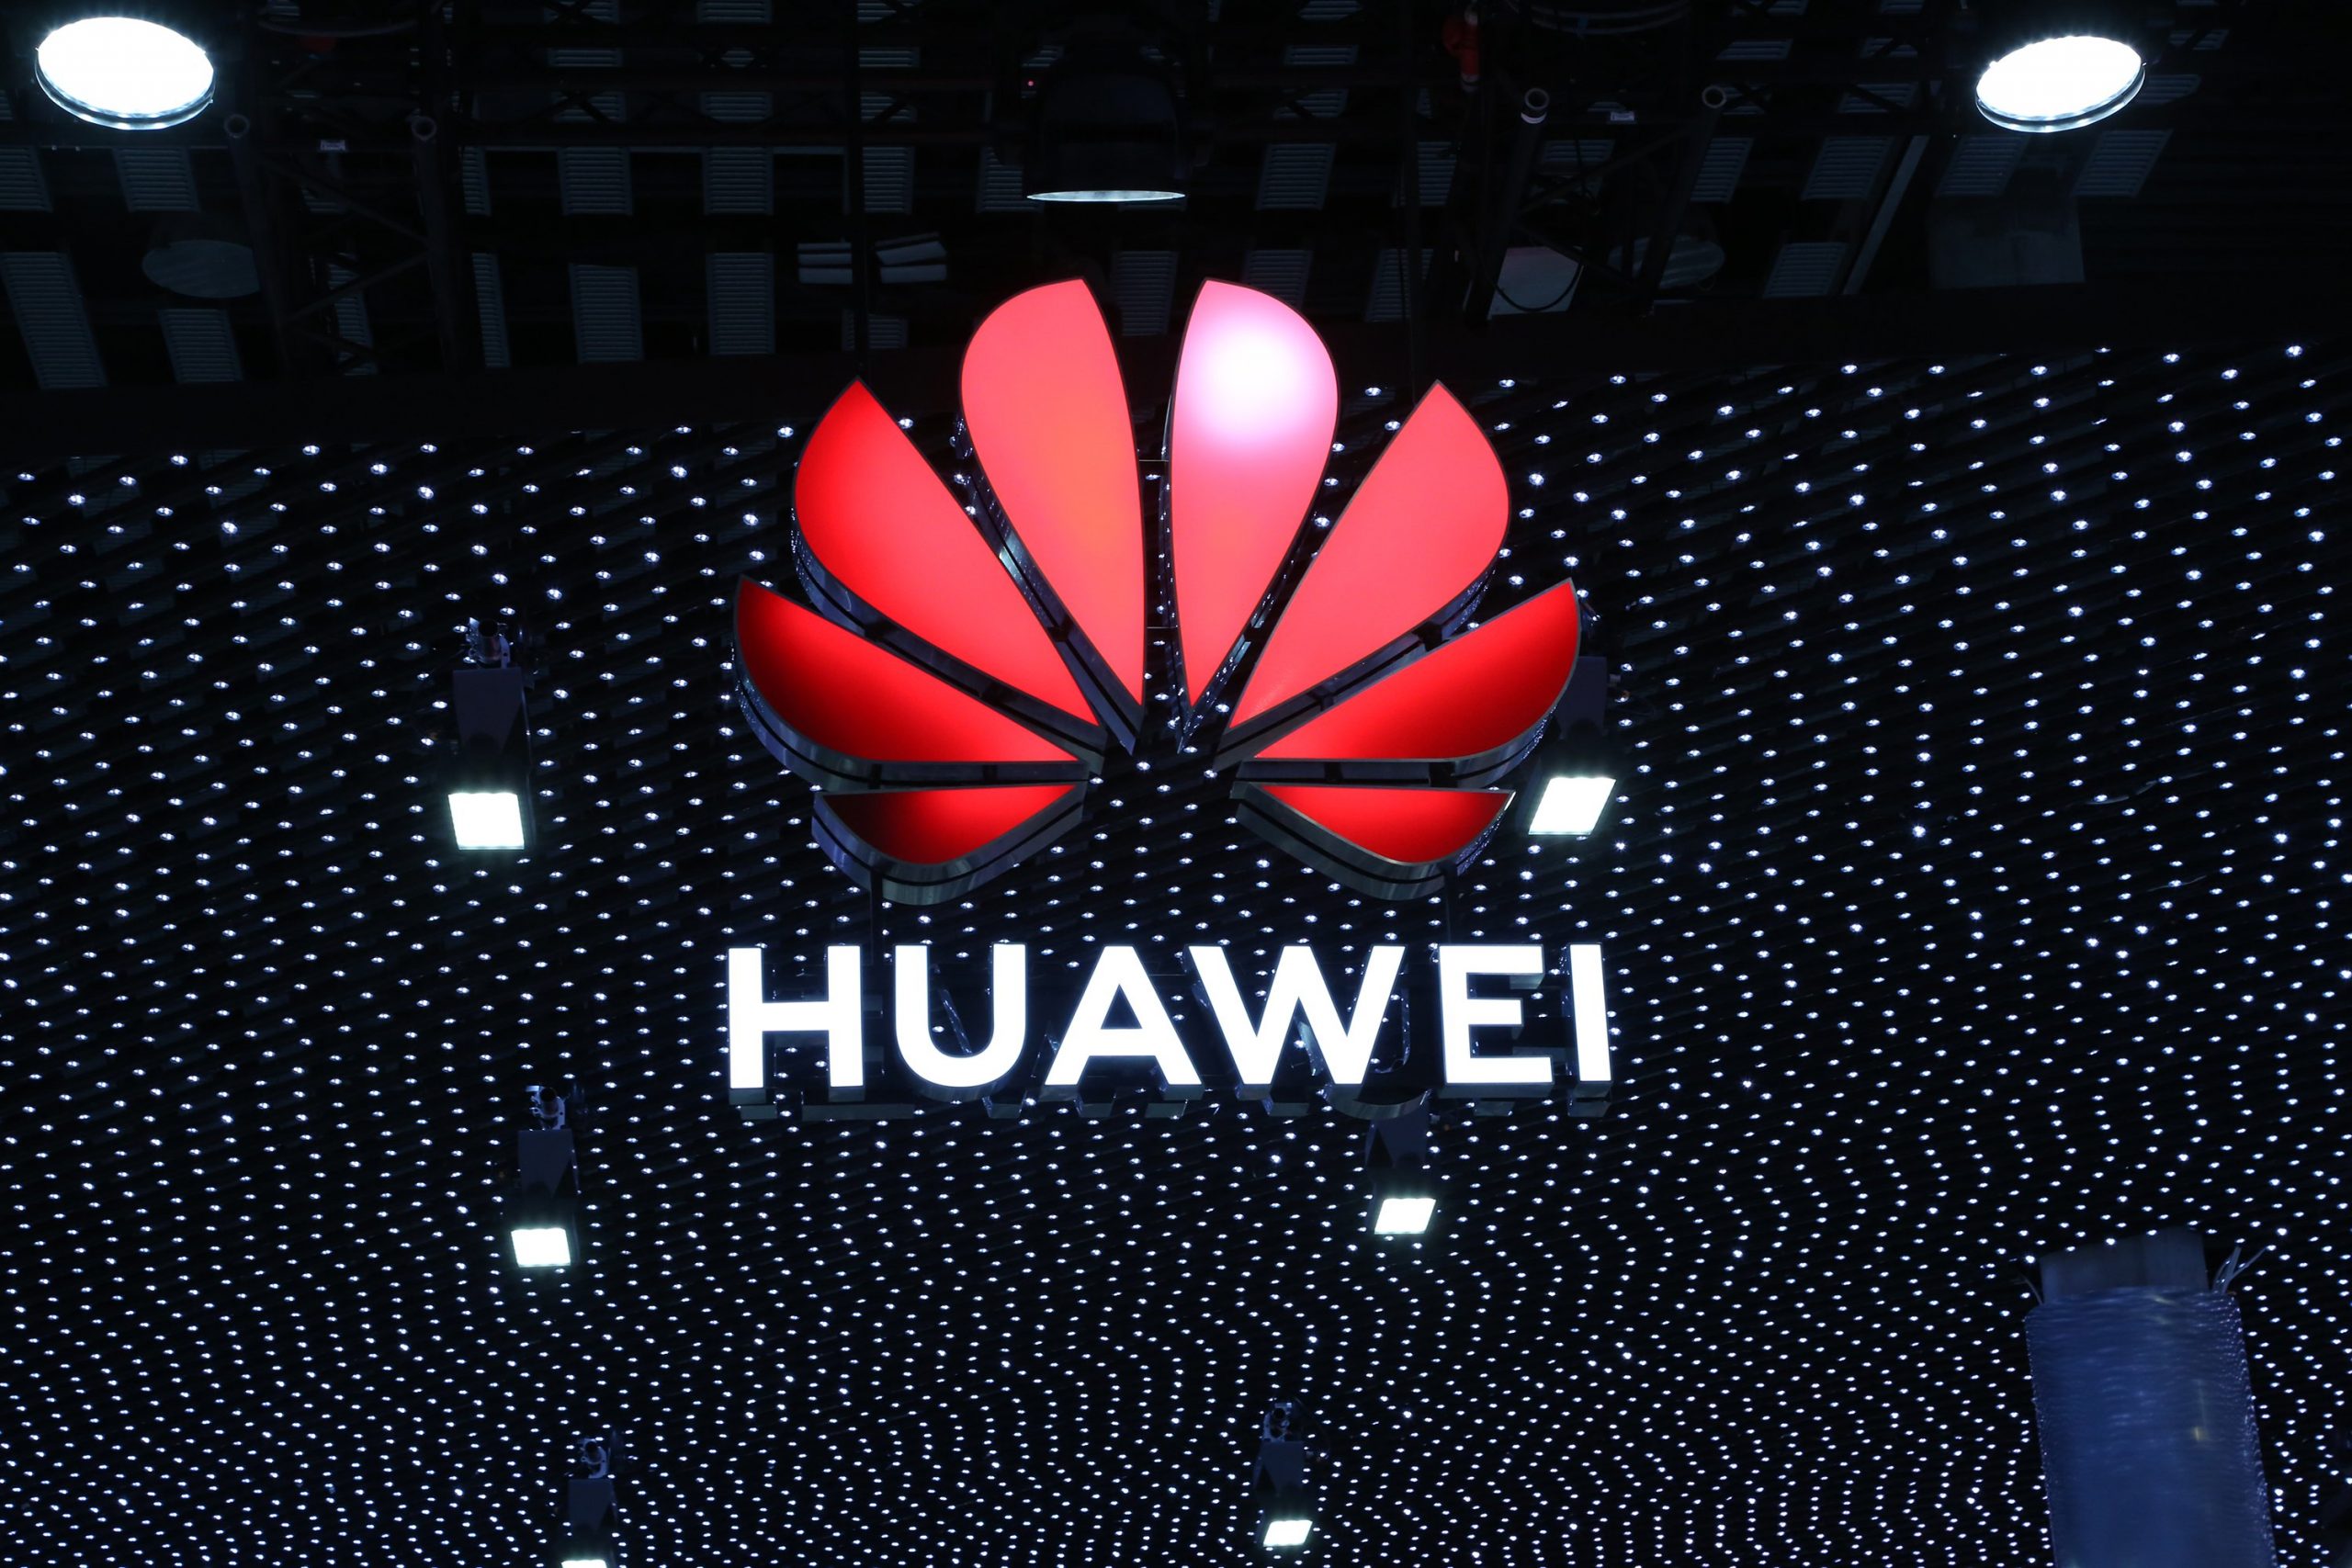 Huawei leads Chinese smartphone market in Q3 2020, reveals CINNO Research